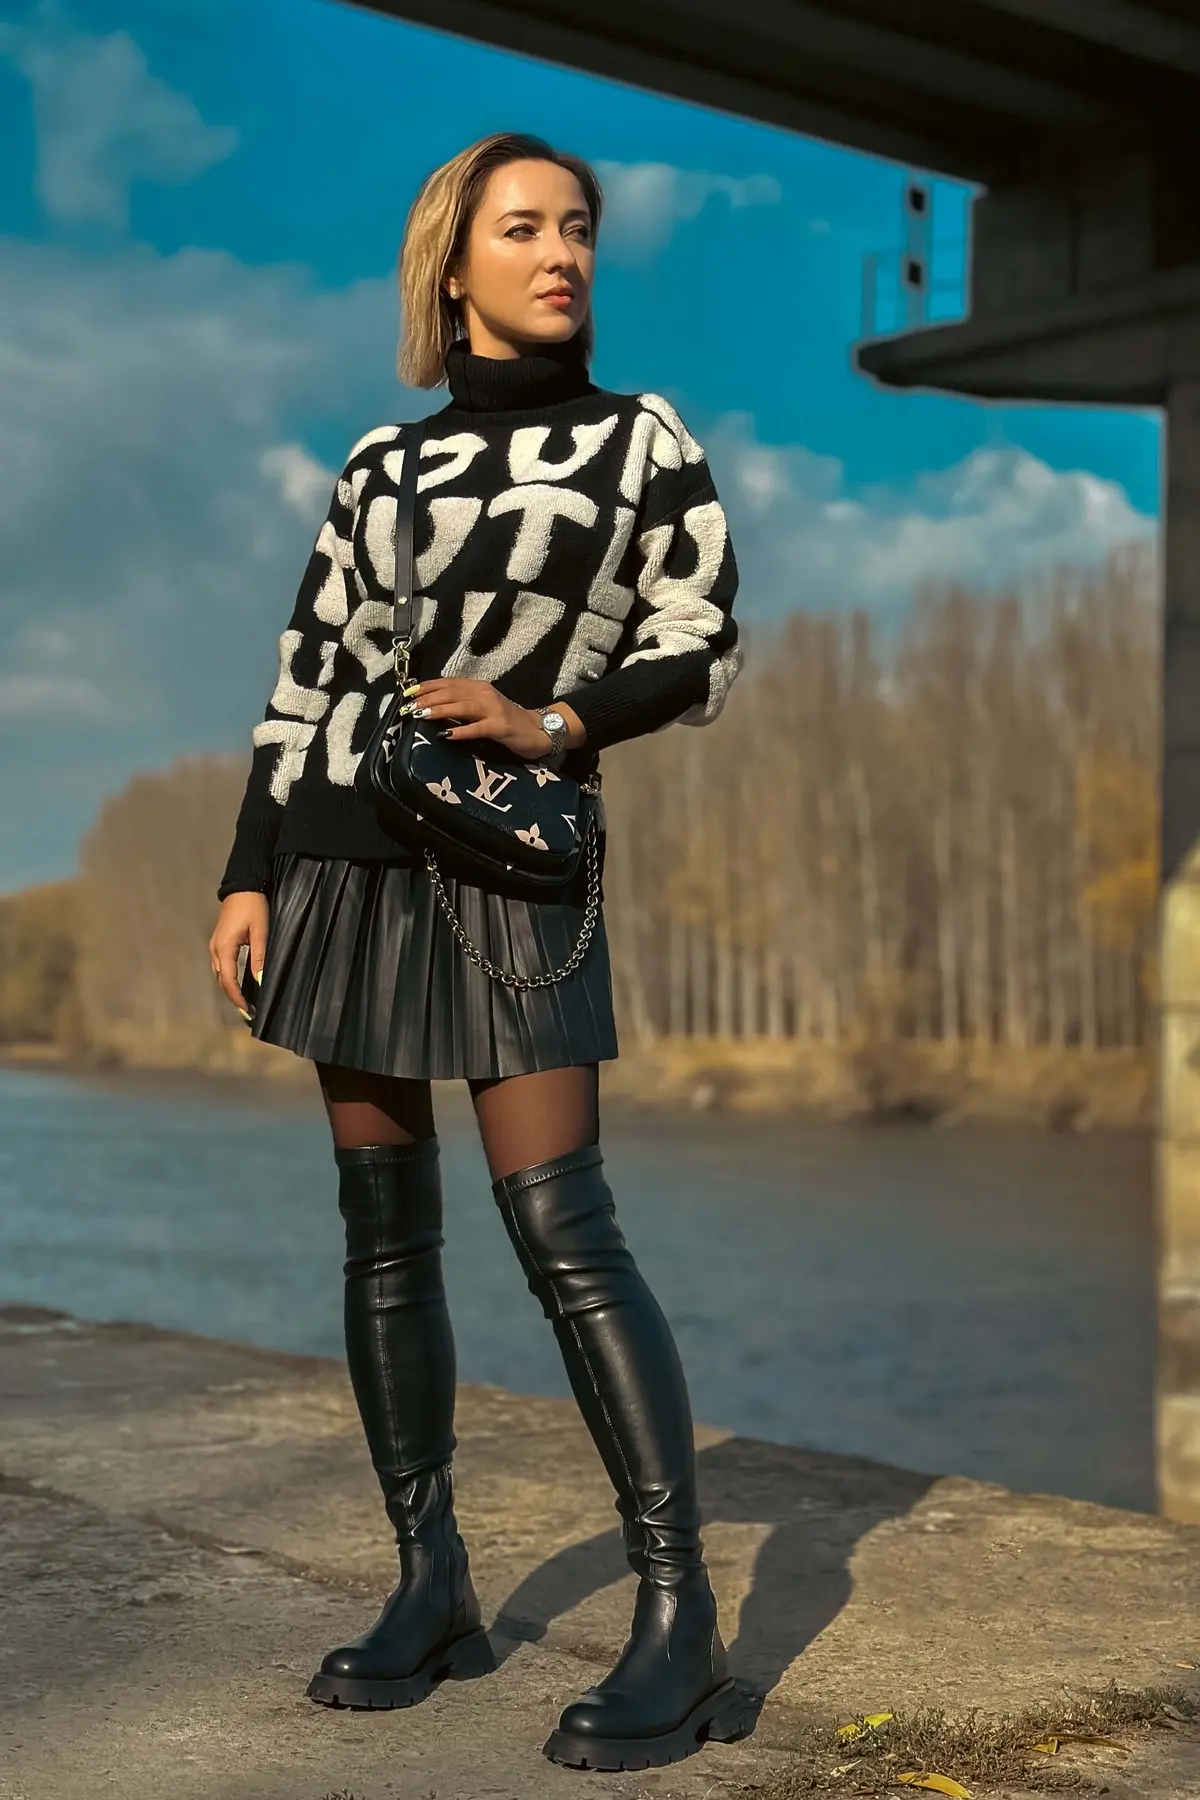 over the knee black leather boots for skinny legs paired with short pleated skirt and sweater